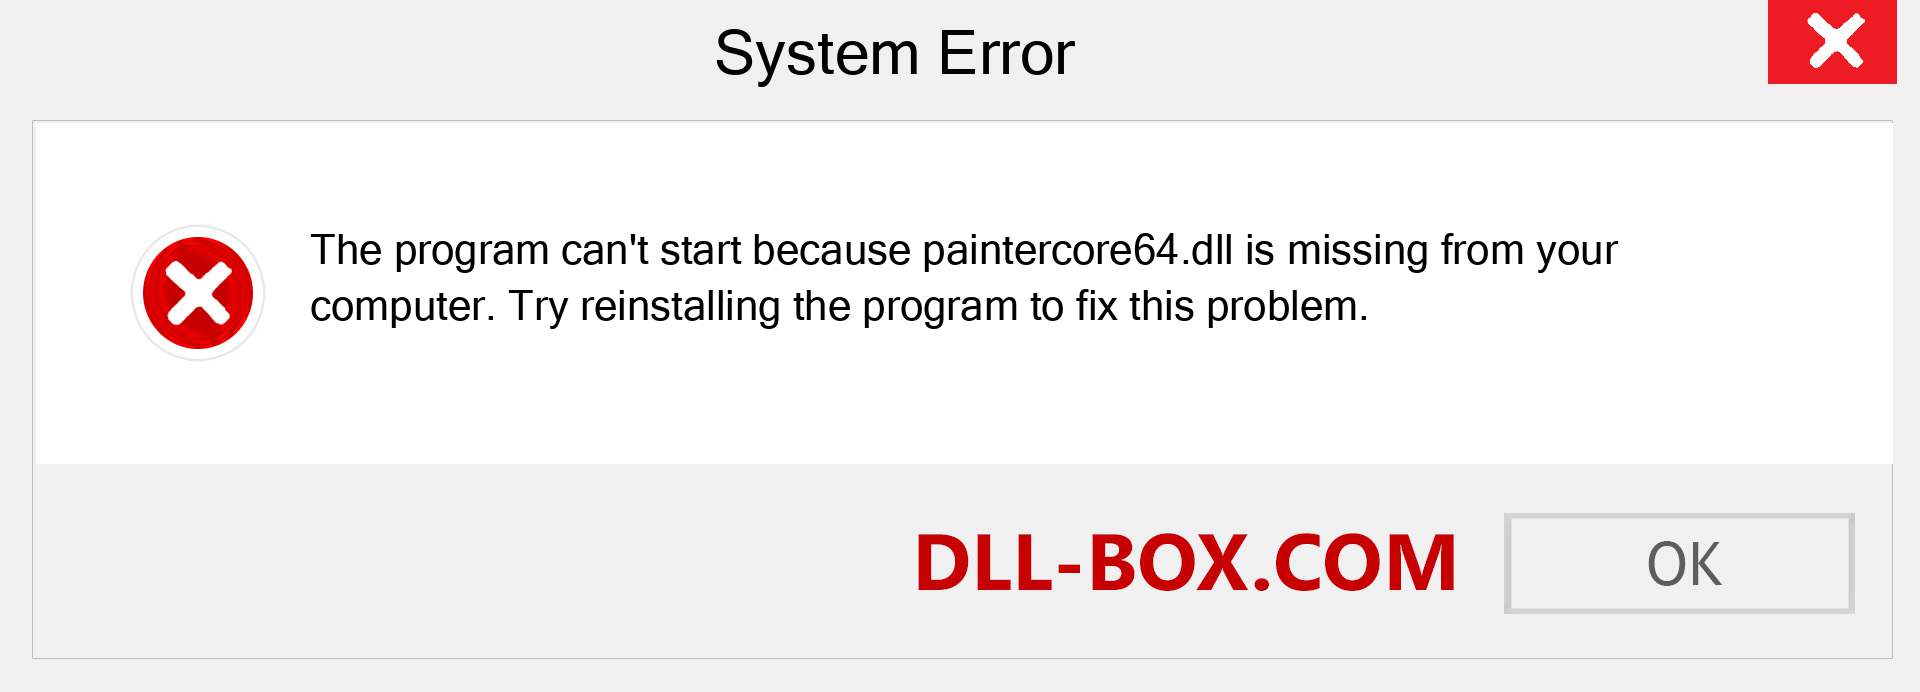  paintercore64.dll file is missing?. Download for Windows 7, 8, 10 - Fix  paintercore64 dll Missing Error on Windows, photos, images